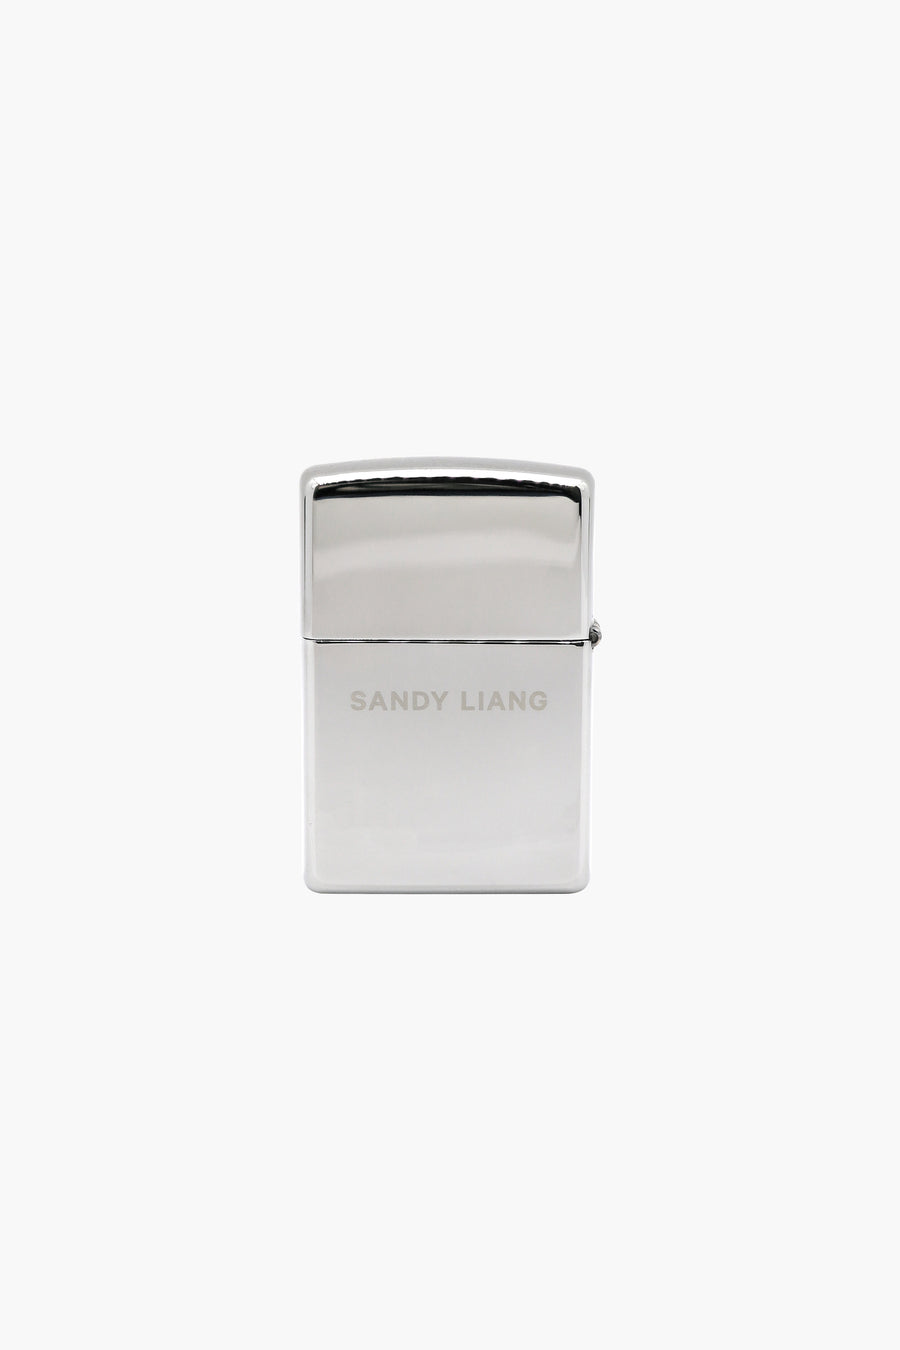 Silver zippo lighter with sandy liang logo on one side and "i'm going to be my own kind of princess" type on other side